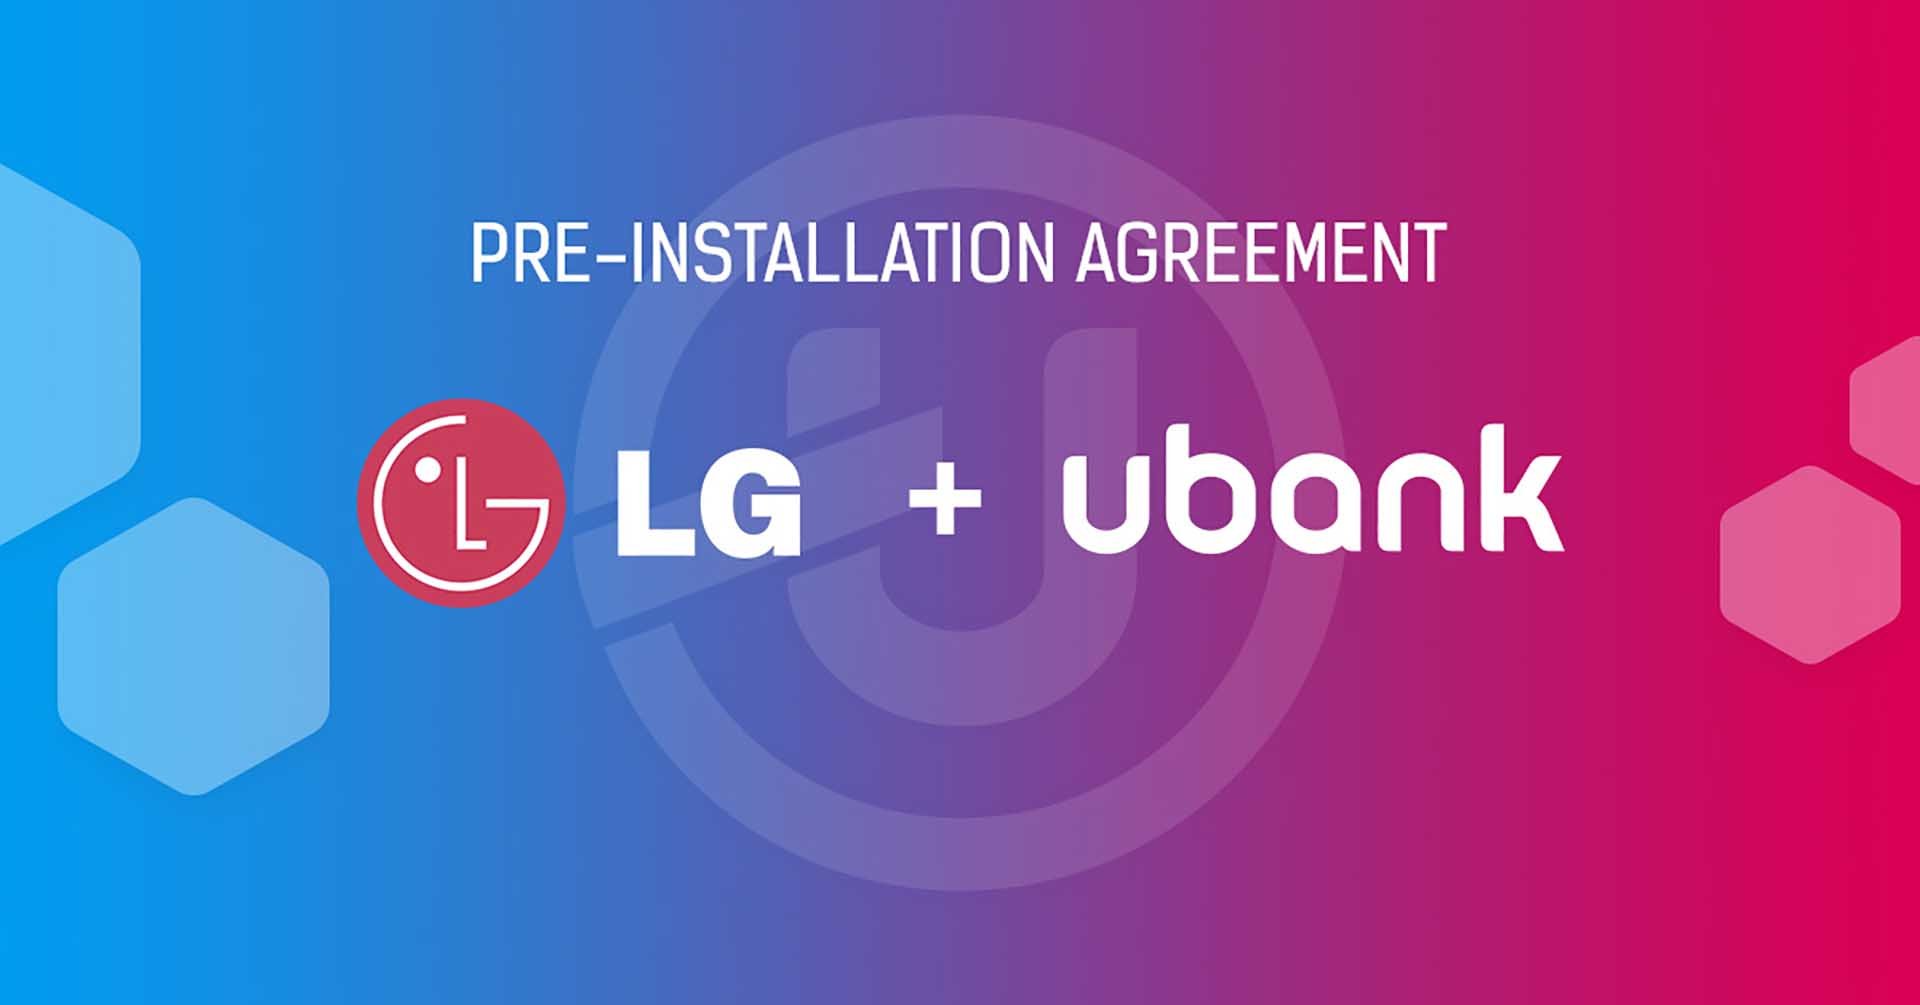 Ubank Mobile App (with Ubcoin Market as its integral part) Signs Pre-Installation Deal With South Korean Tech Giant LG